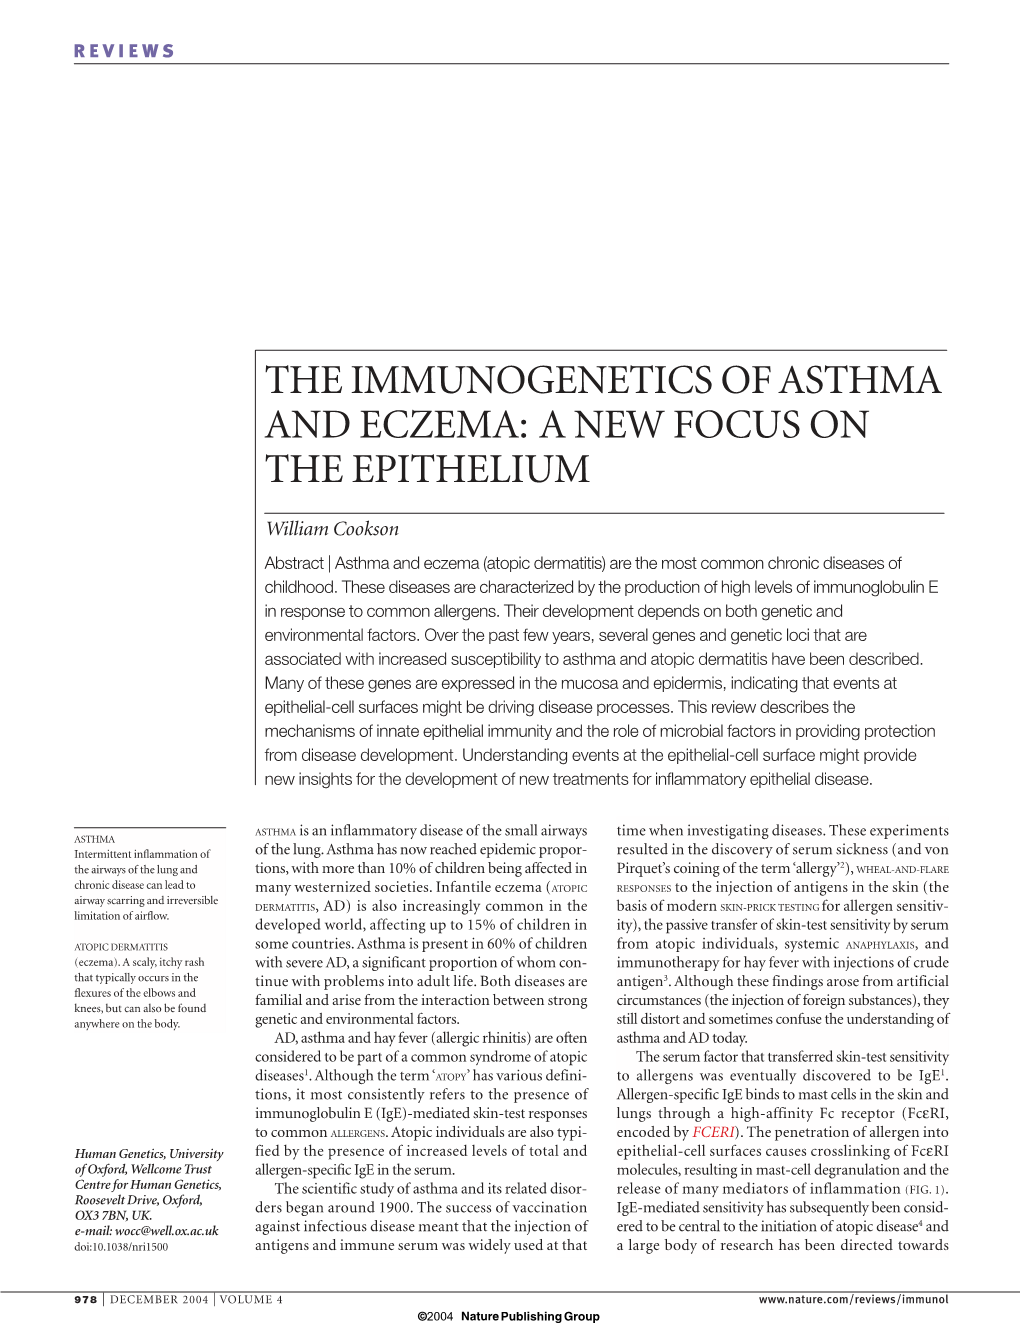 The Immunogenetics of Asthma and Eczema: a New Focus on the Epithelium